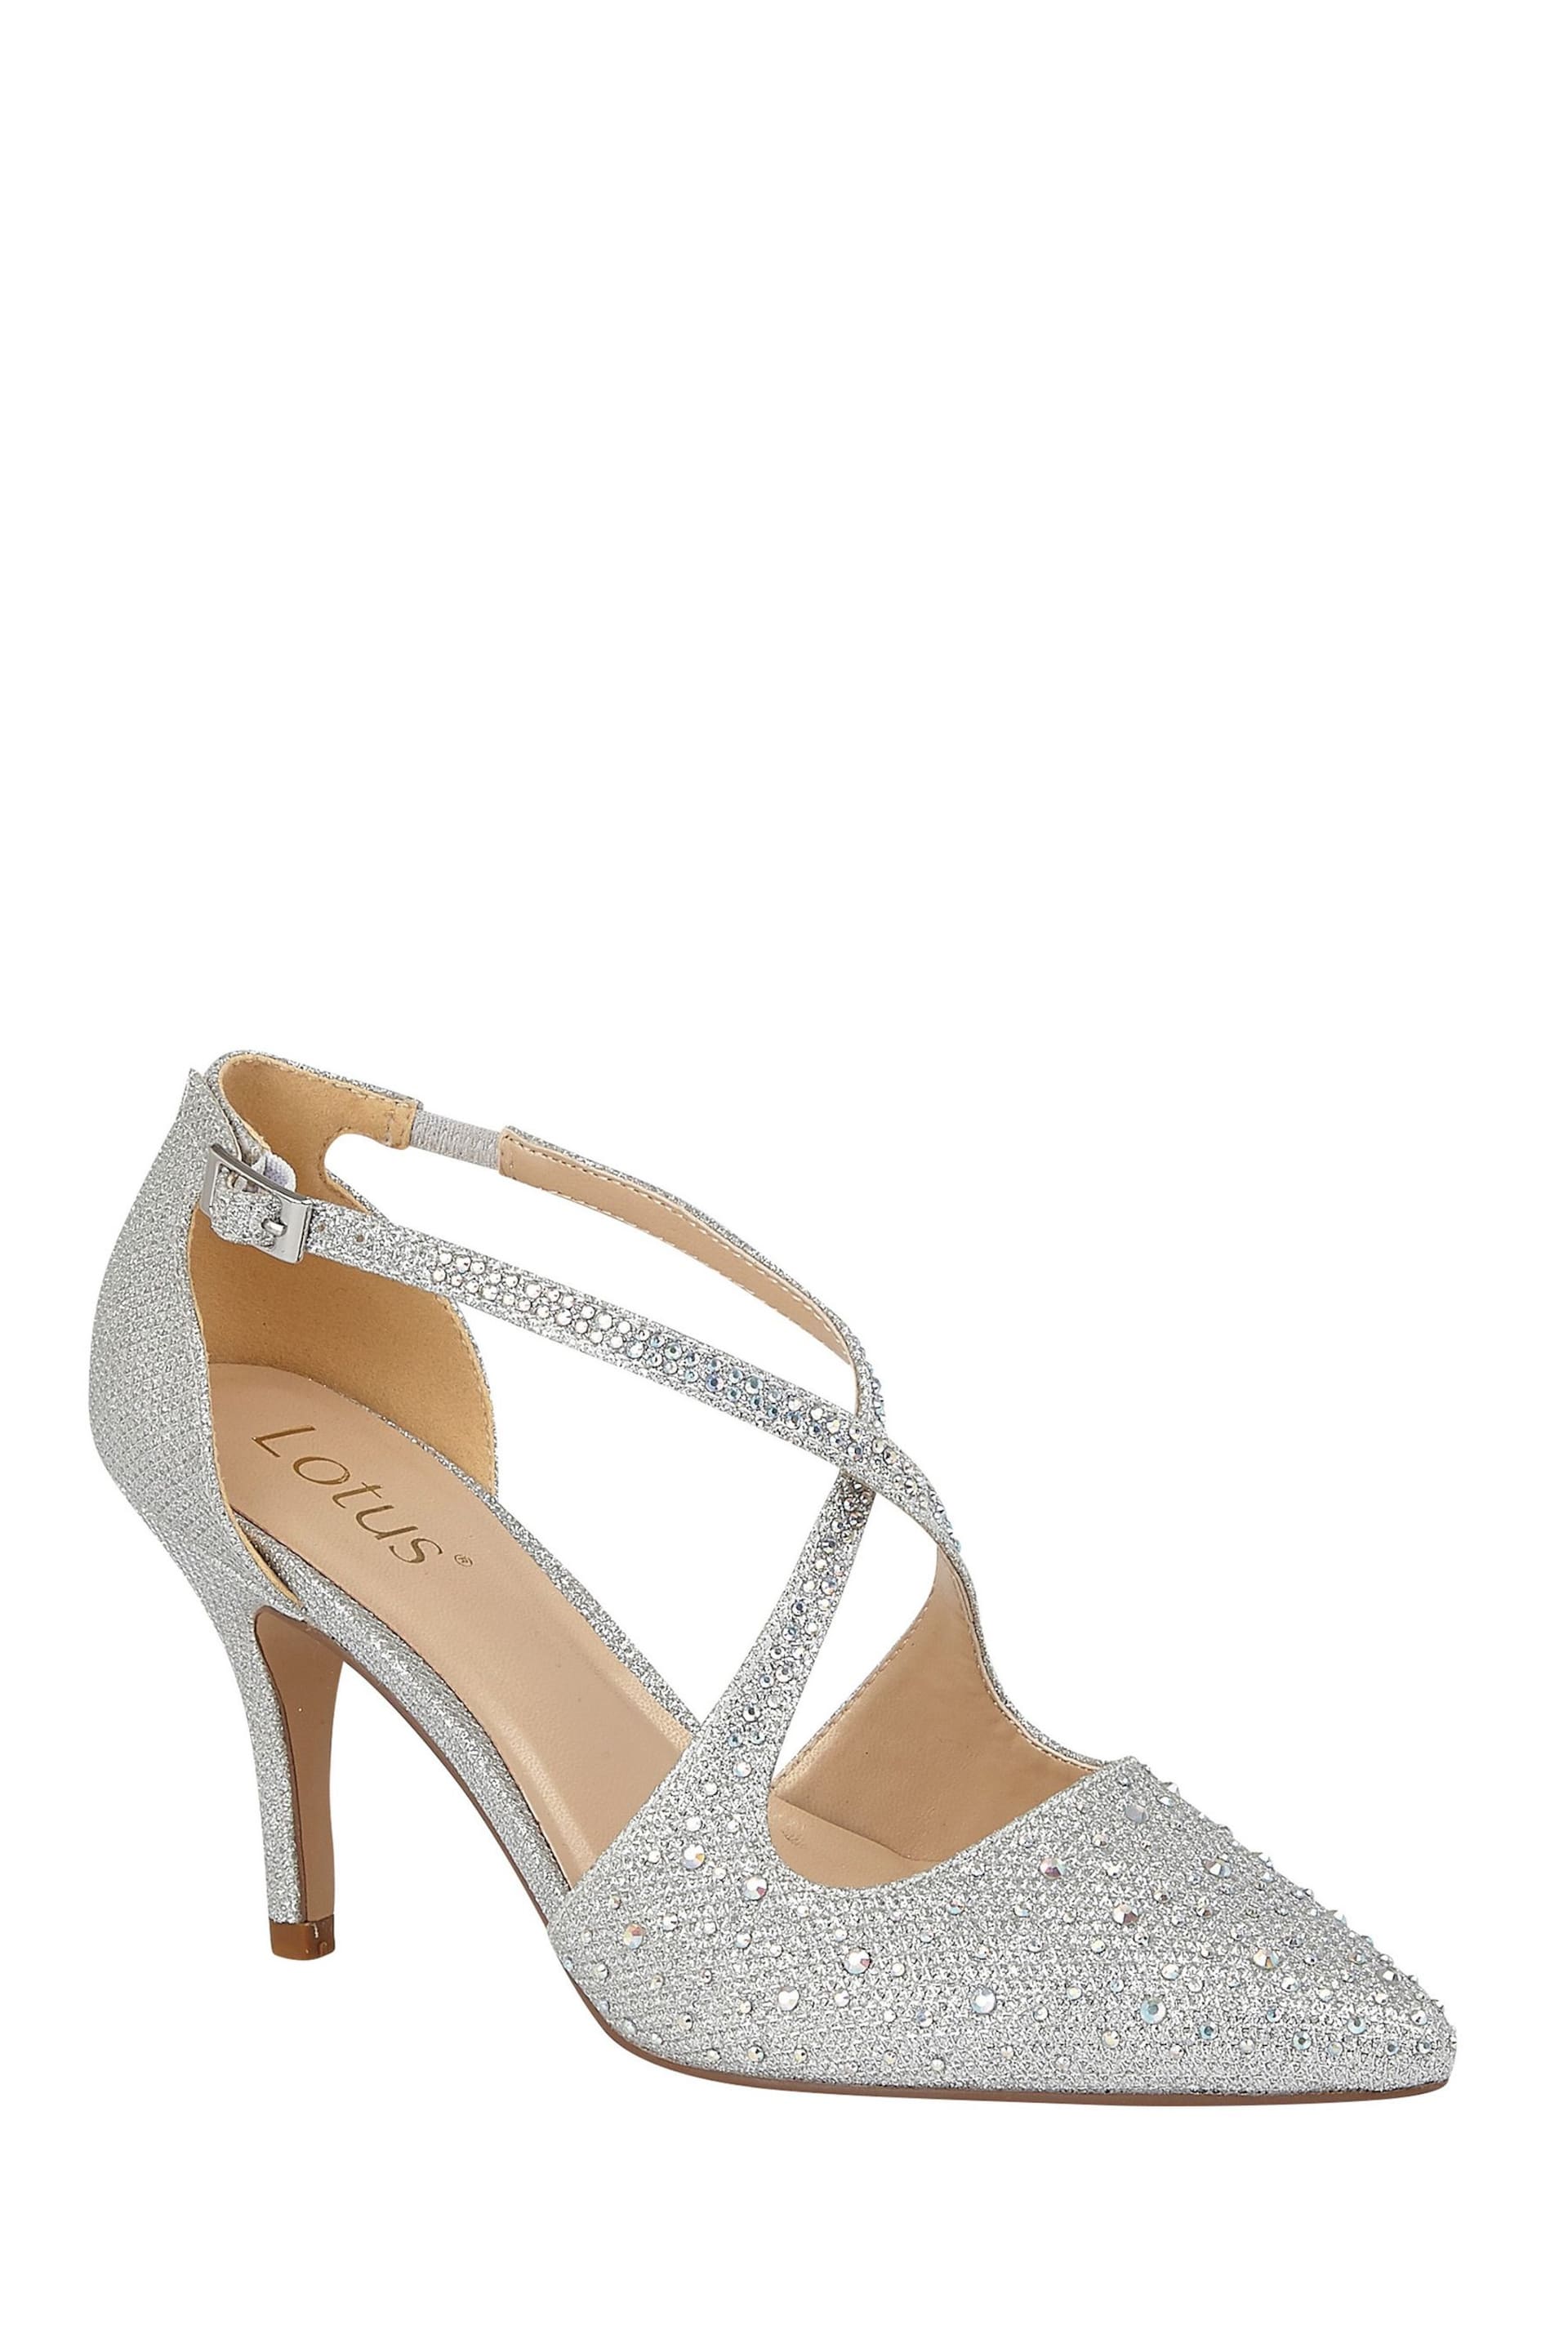 Lotus Silver Pointed-Toe Court Shoes - Image 1 of 4